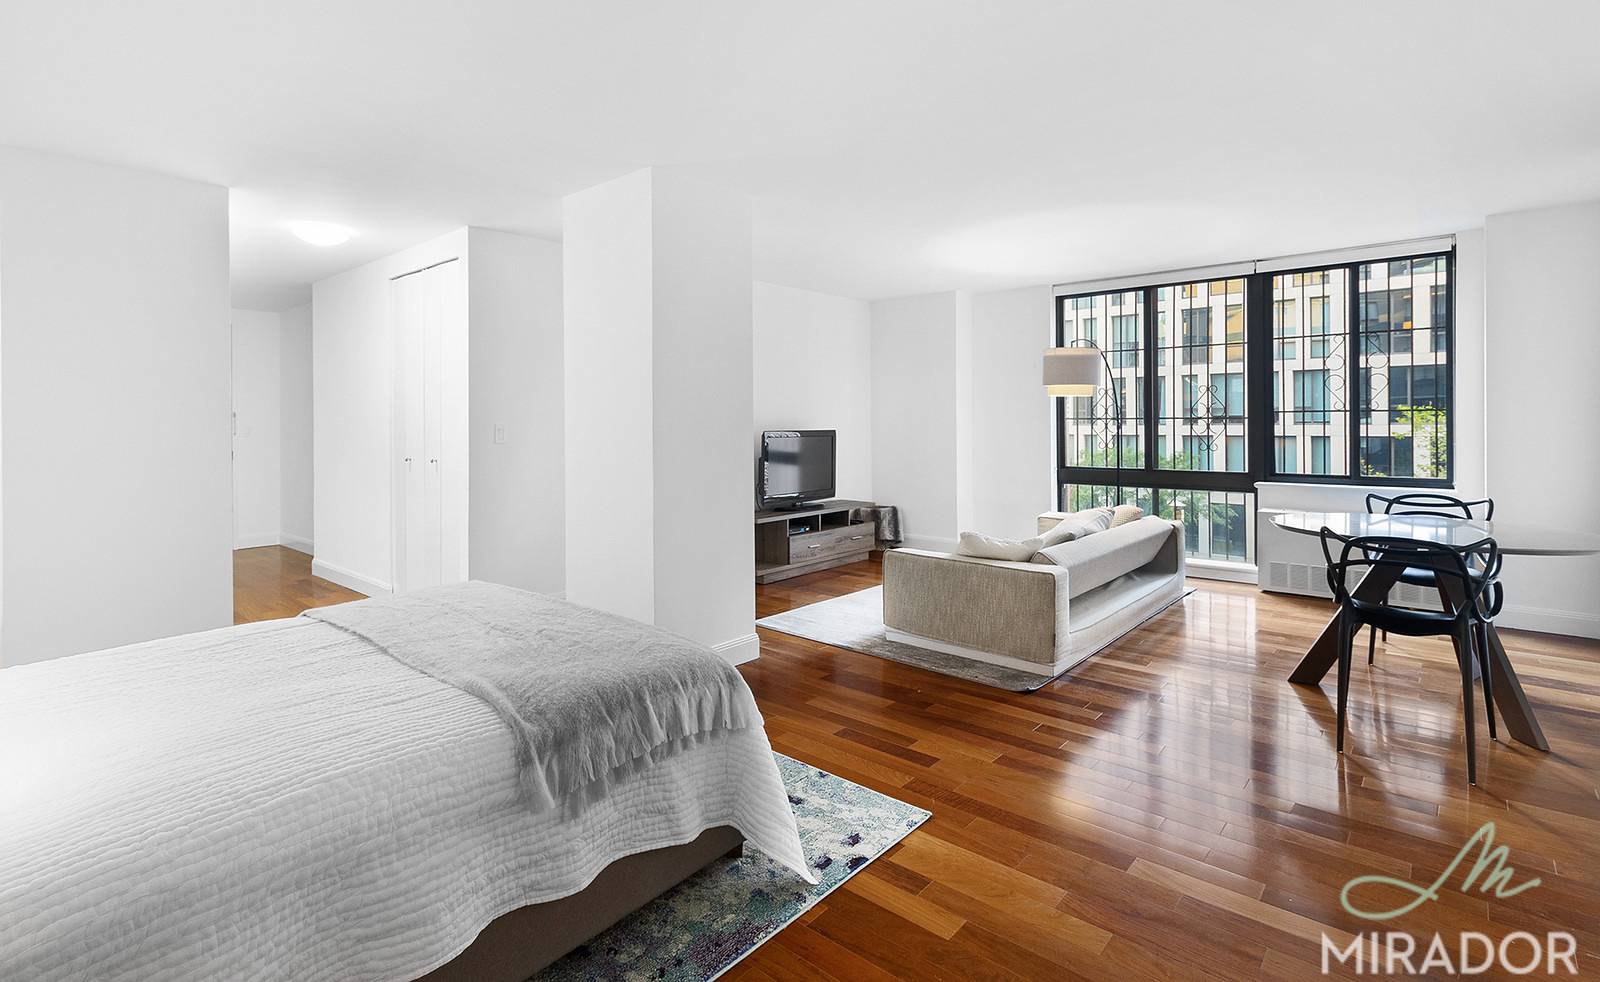 INSTRATA Gramercy is a gorgeous, boutique apartment community, featuring full amenities, nestled just below 23rd Street, surrounded by an endless array of restaurants, shops, entertainment, and neighborhood parks.